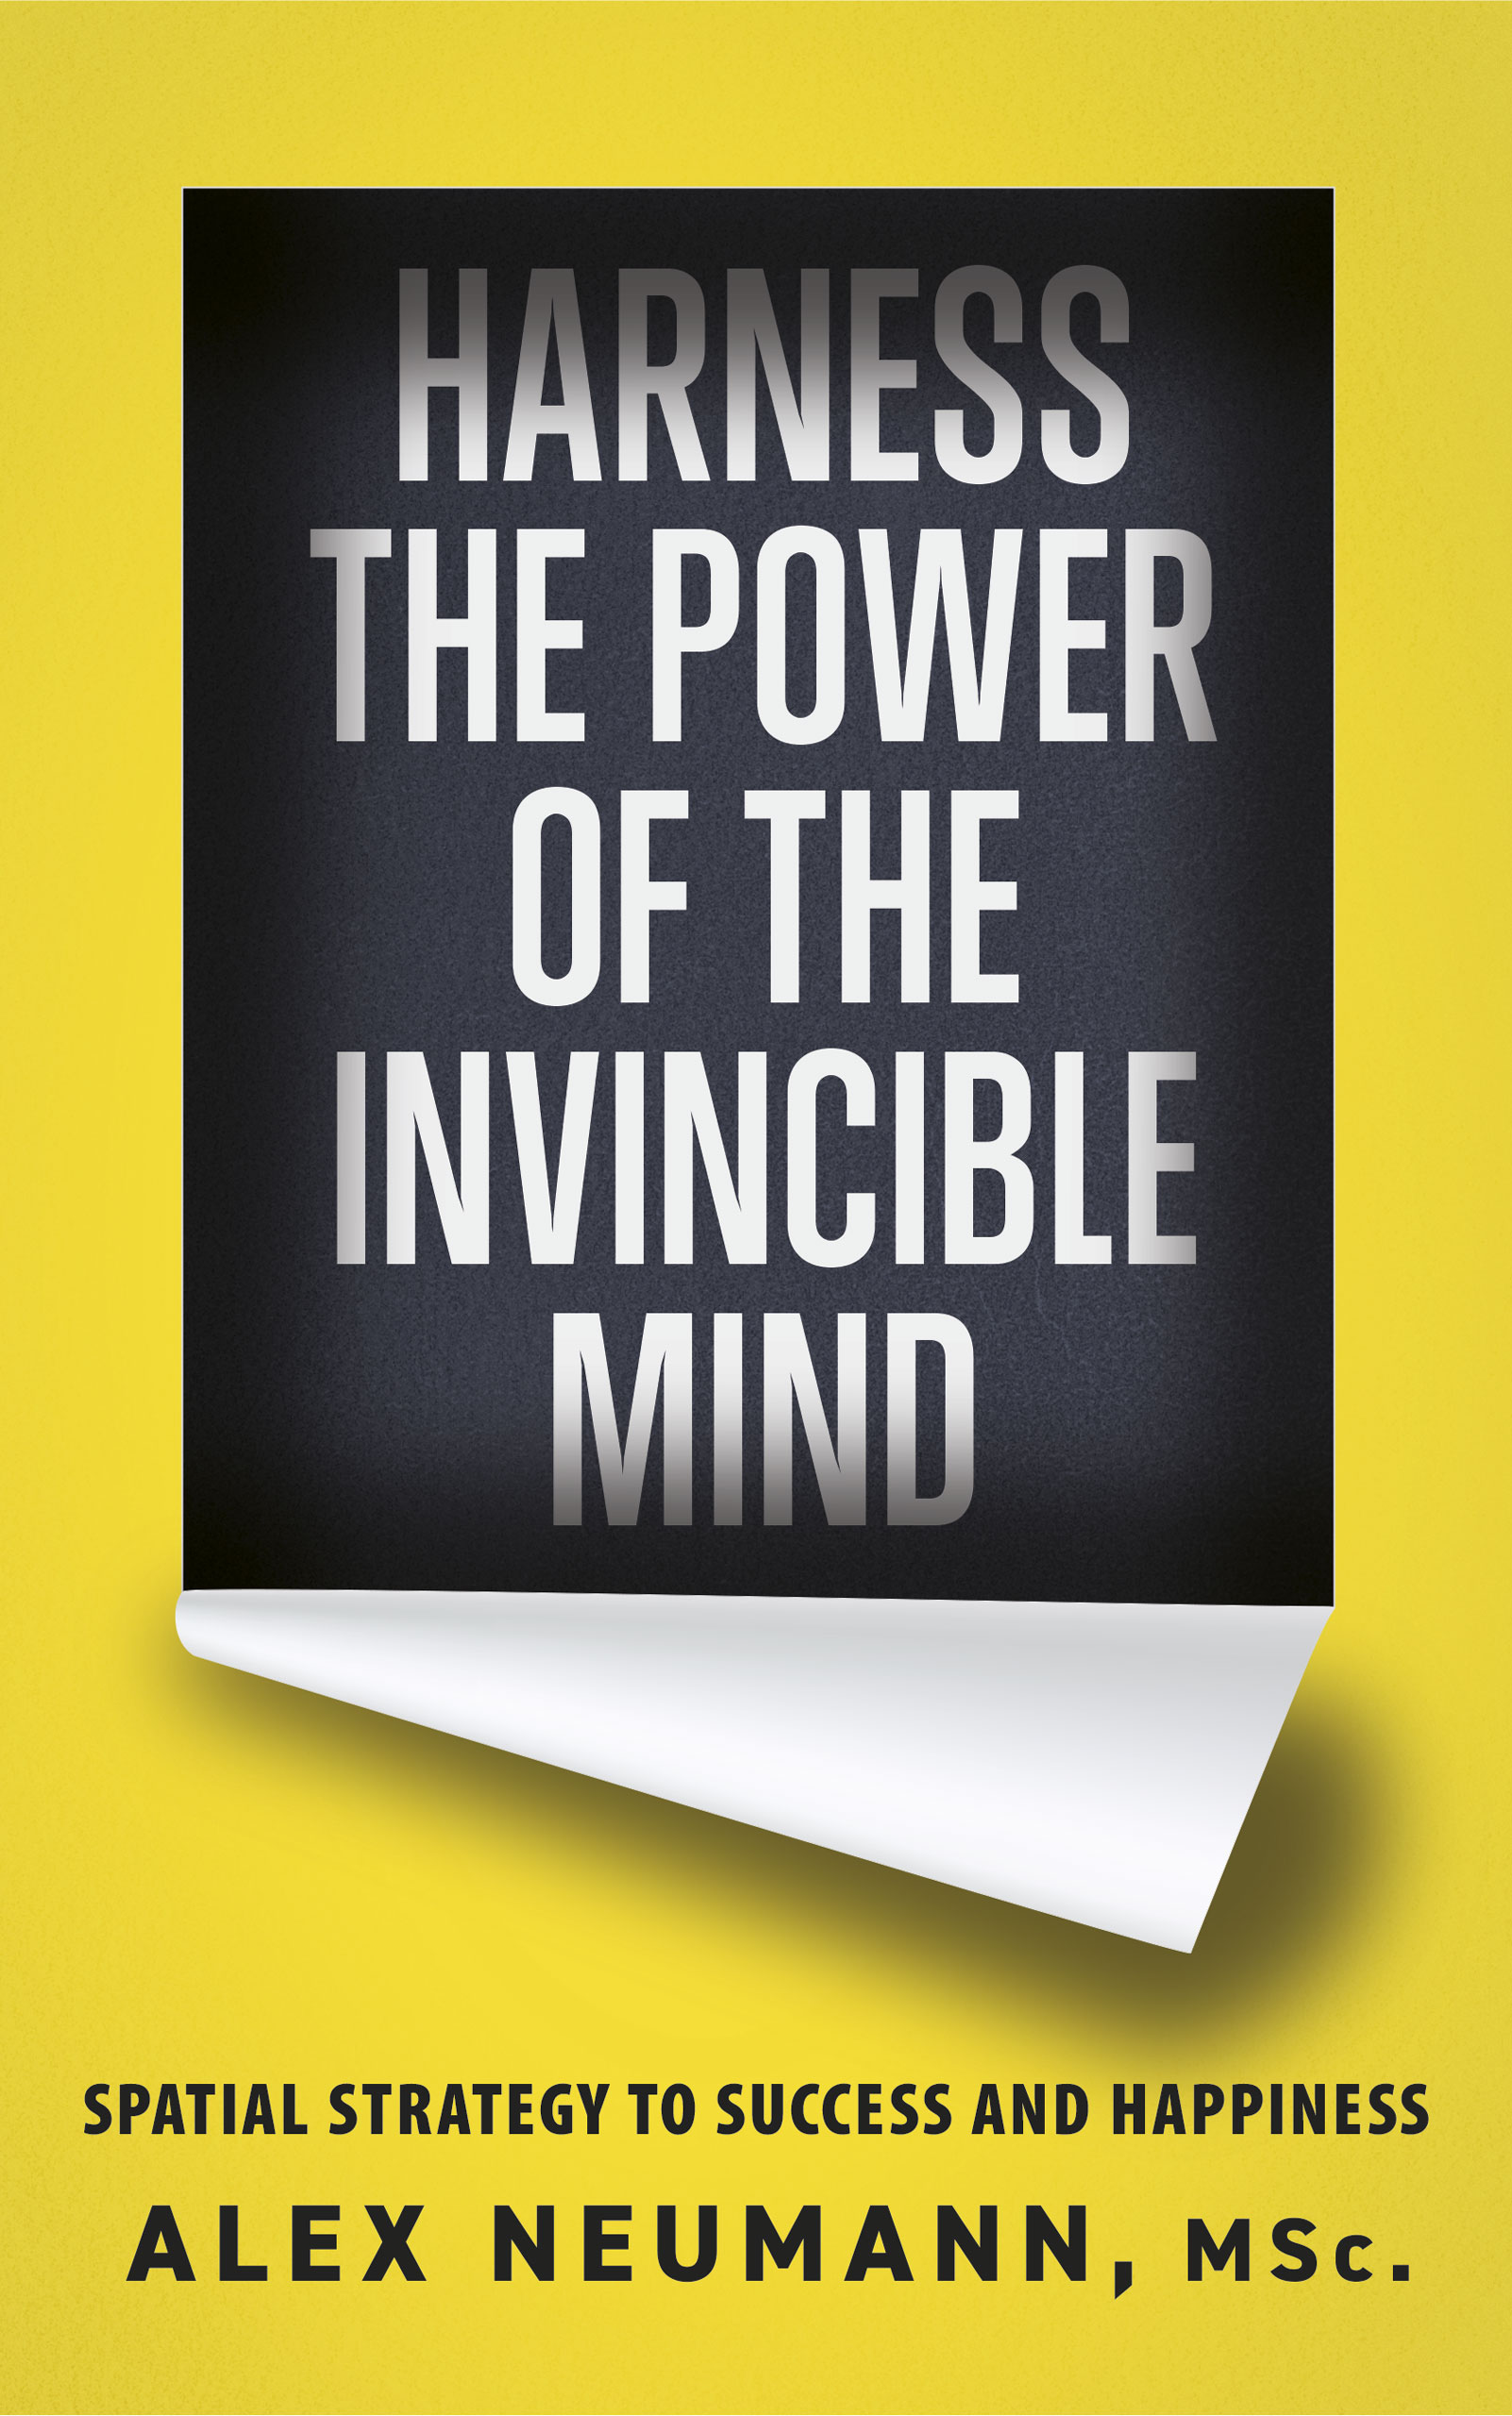 FREE: Harness the Power of the Invincible Mind: Spatial Strategy to Success and Happiness by Alex Neumann